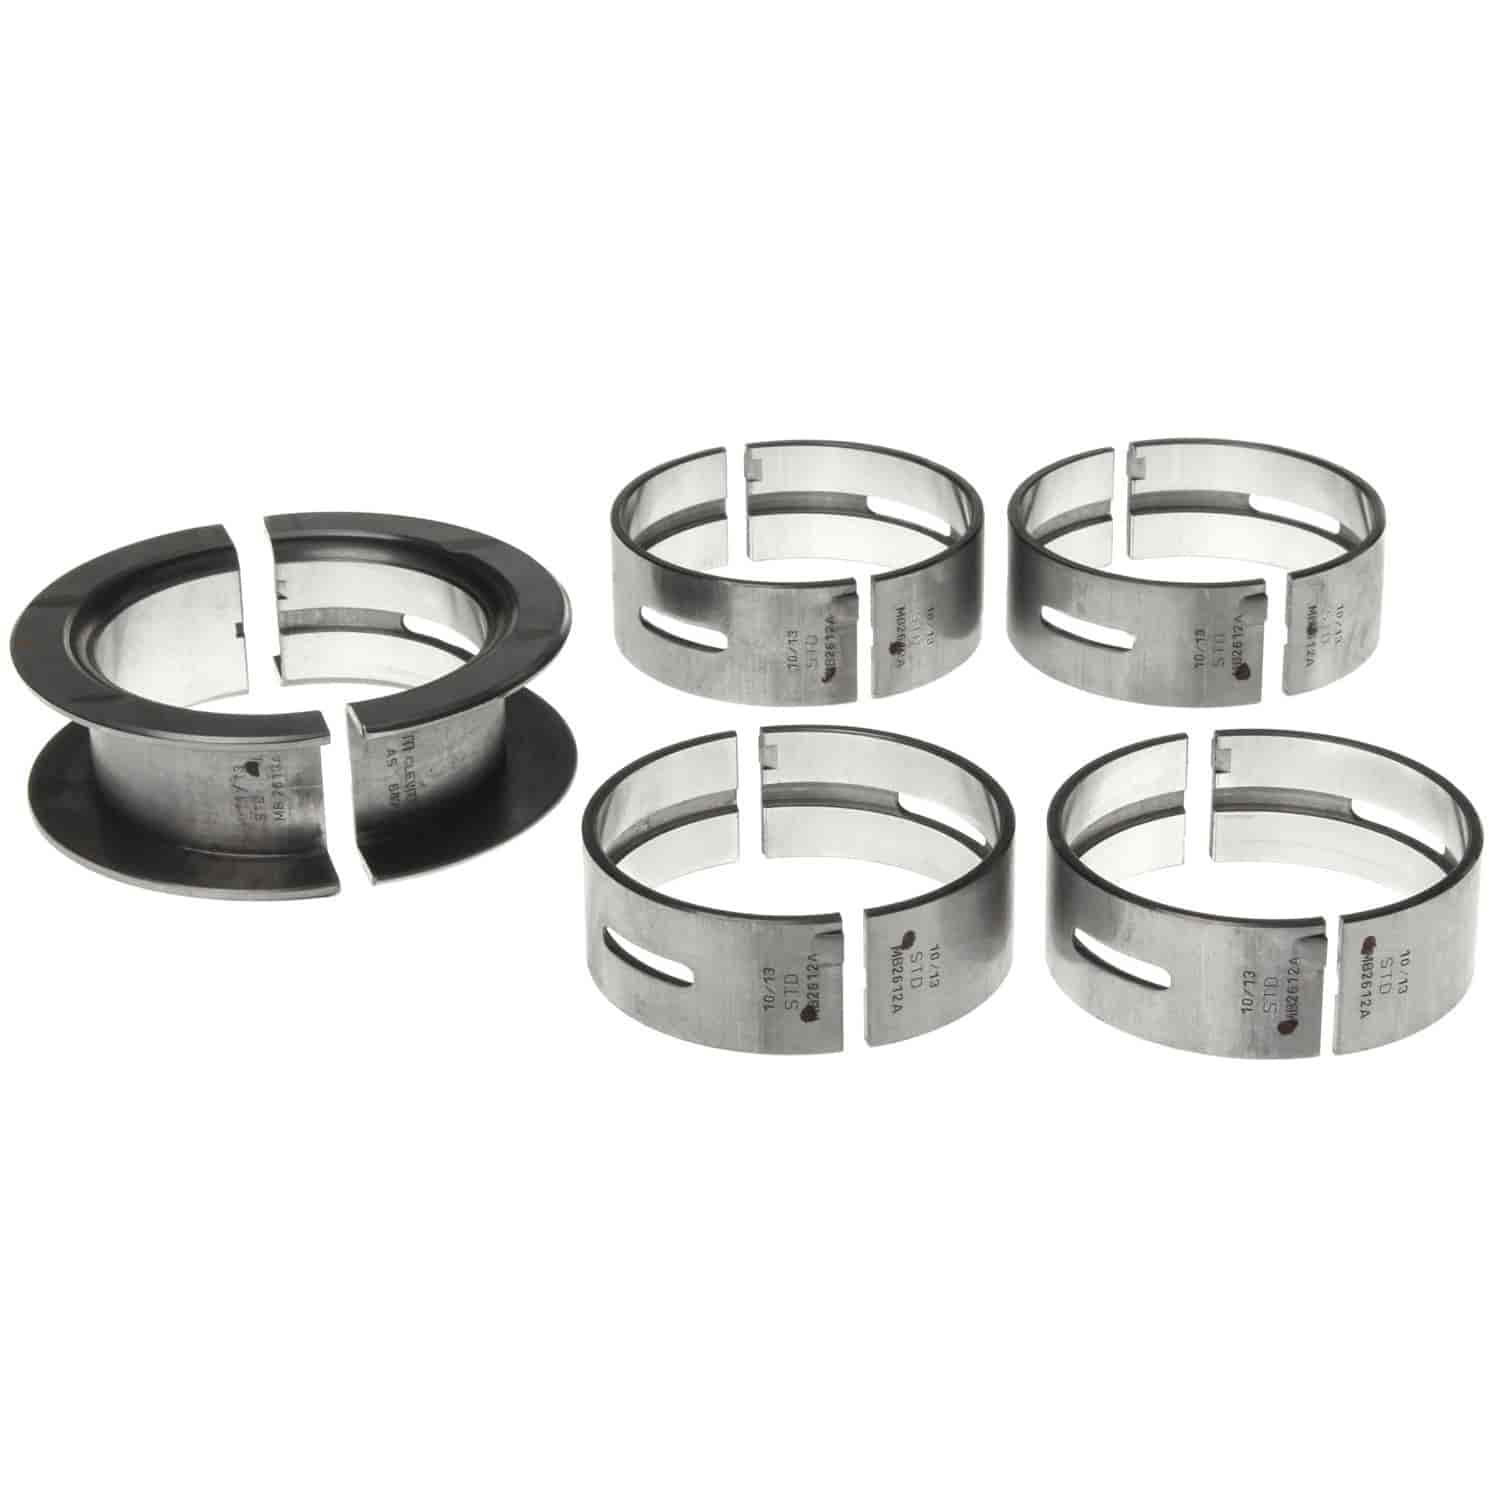 Main Bearing Set Ford 1974-1997 L4 2.0/2.3L with .75mm Undersize